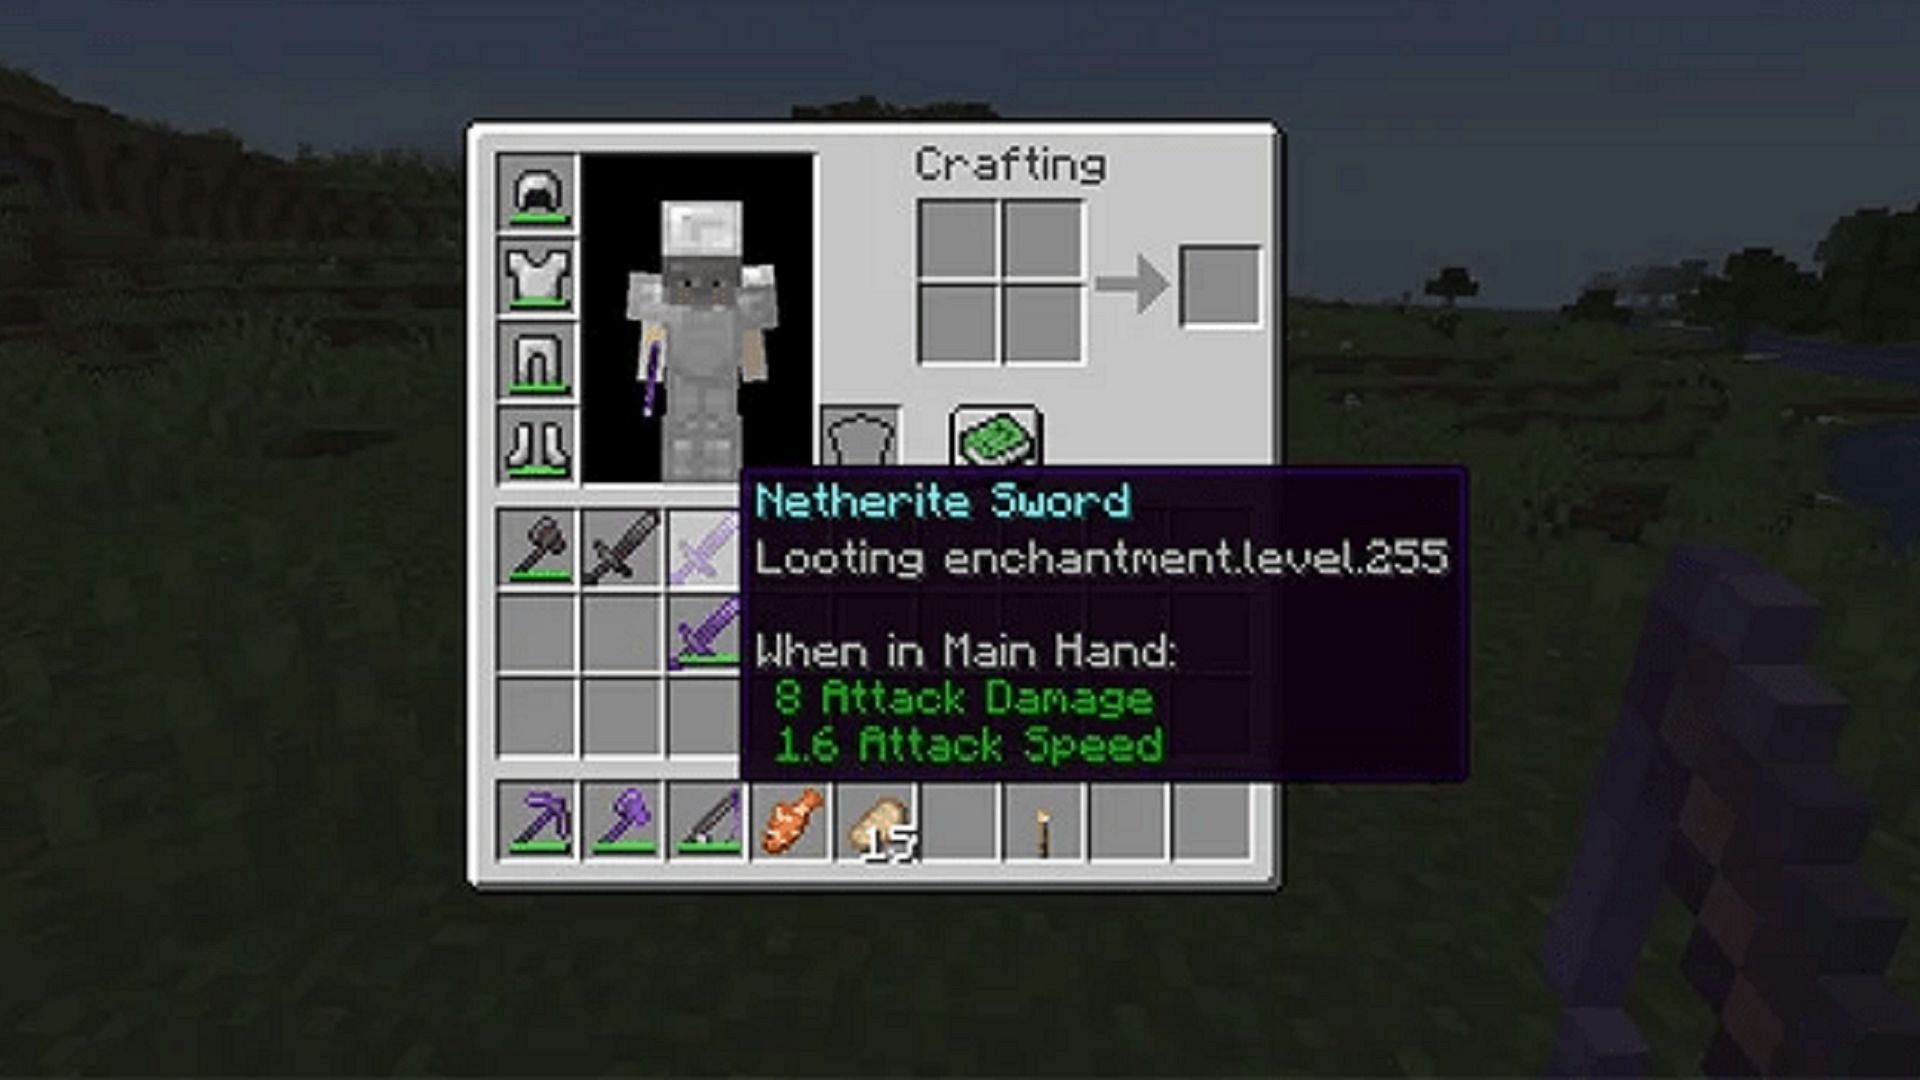 Many enchantments can be given to players at level 255, such as Looting (Image via Mojang)